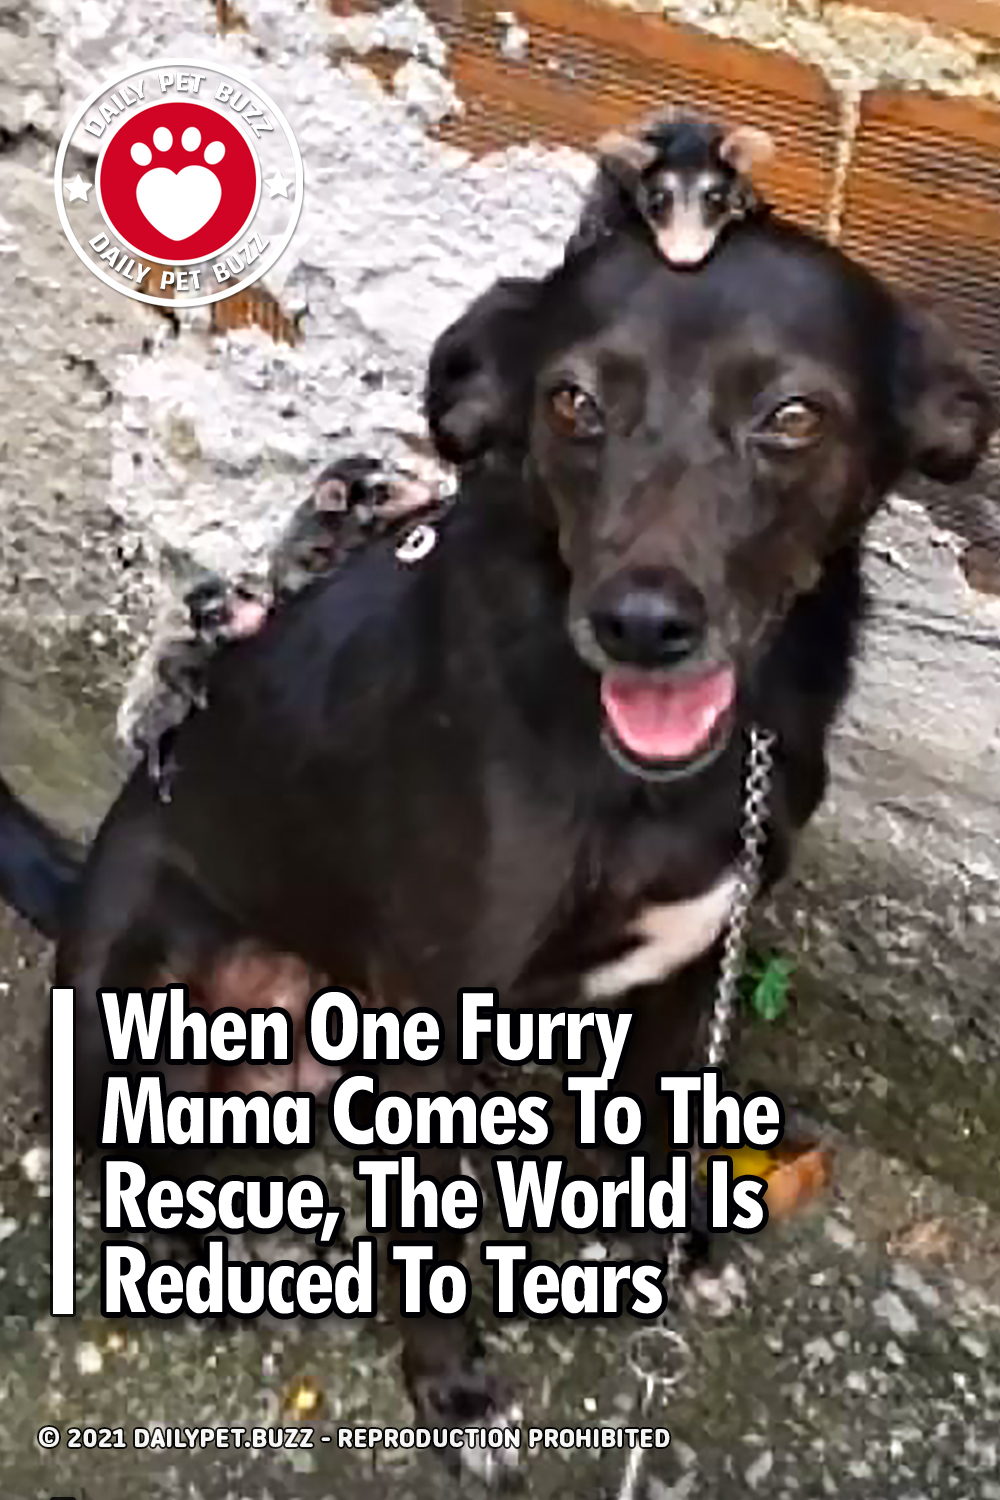 When One Furry Mama Comes To The Rescue, The World Is Reduced To Tears